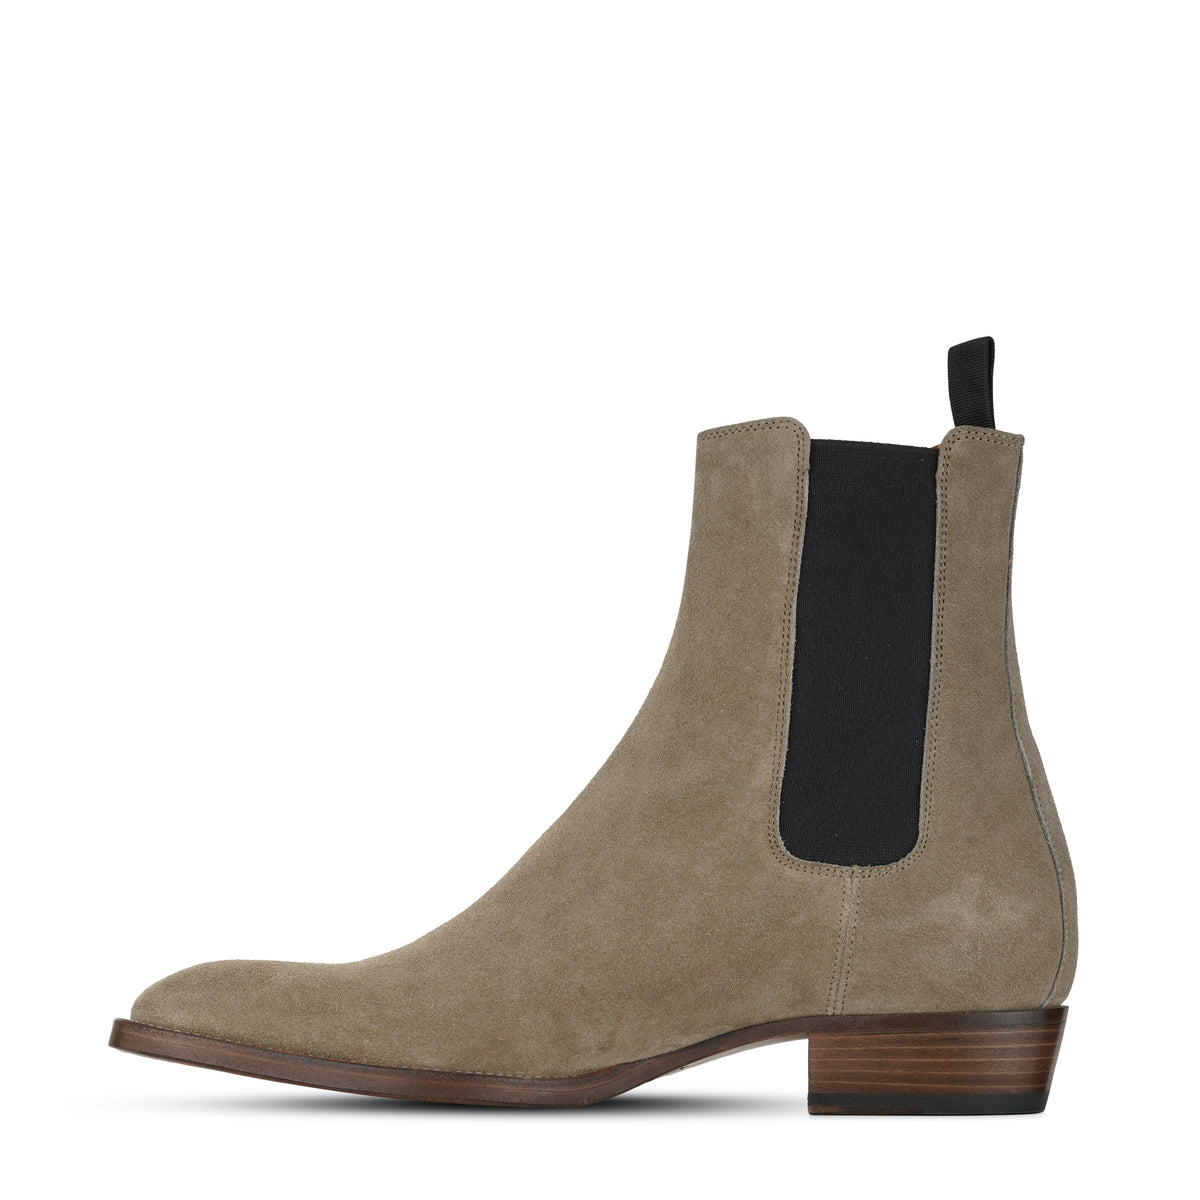 Unknown Articles Light Tobacco Suede Chelsea Boot interior side profile